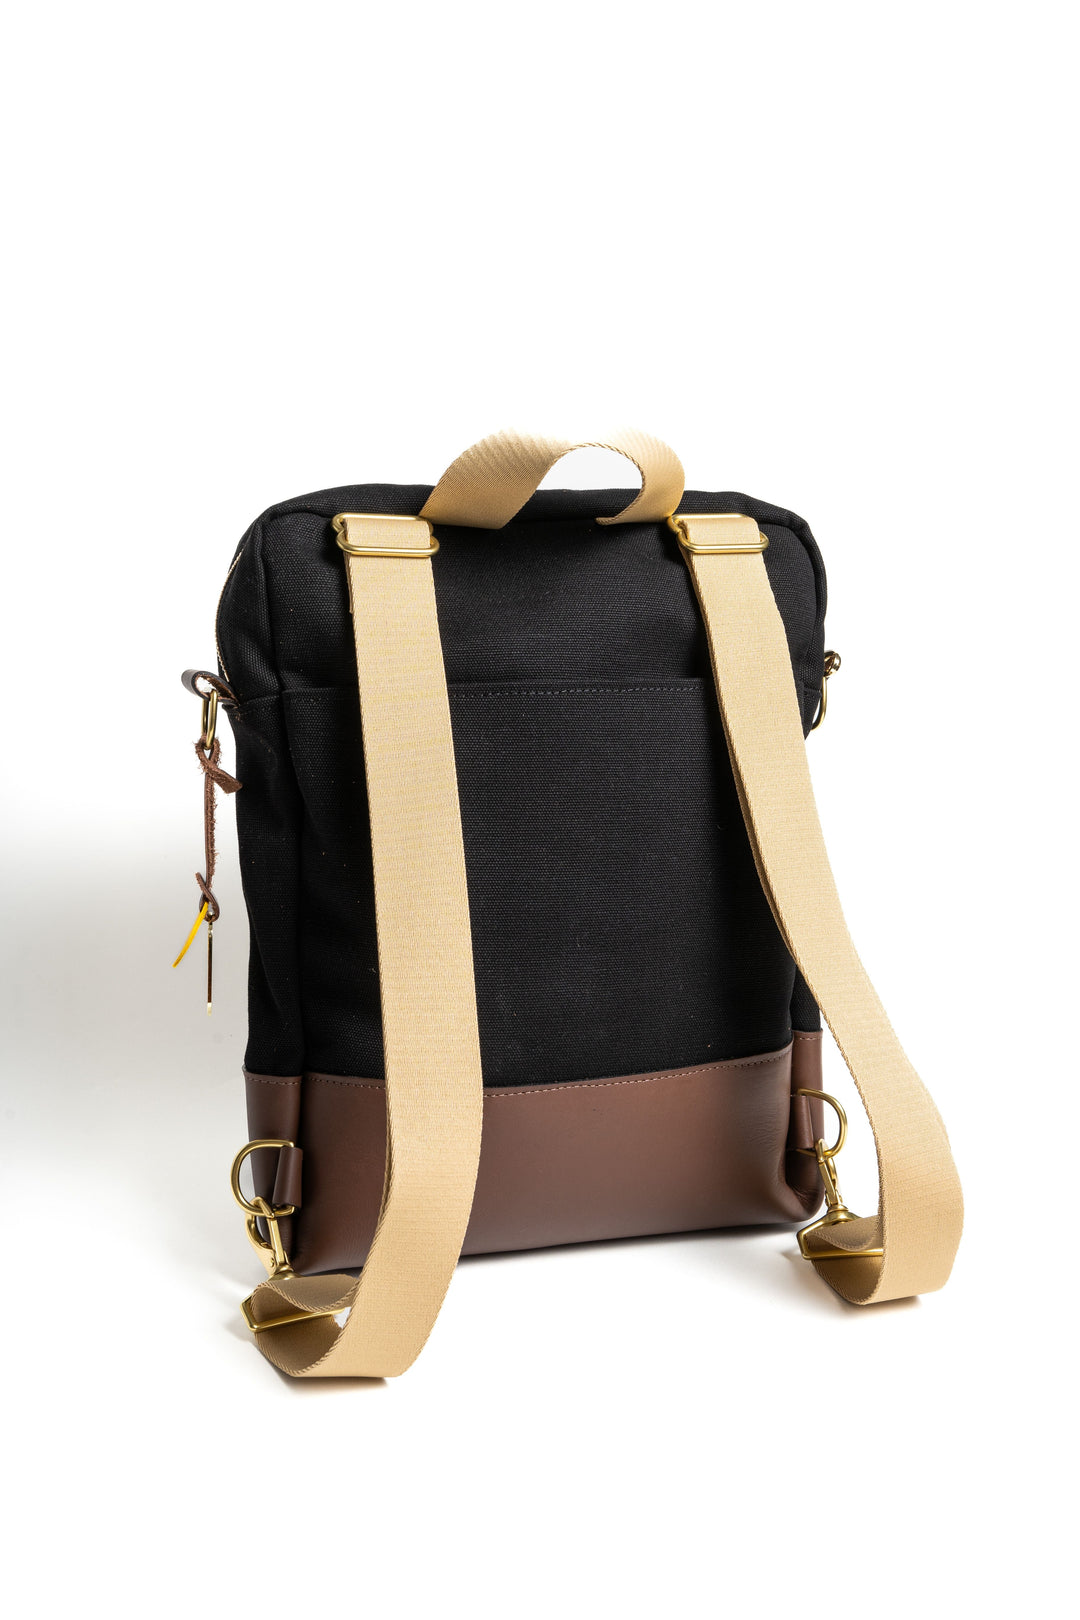 Corbin | Signature Black Canvas + Brown Leather Backpack